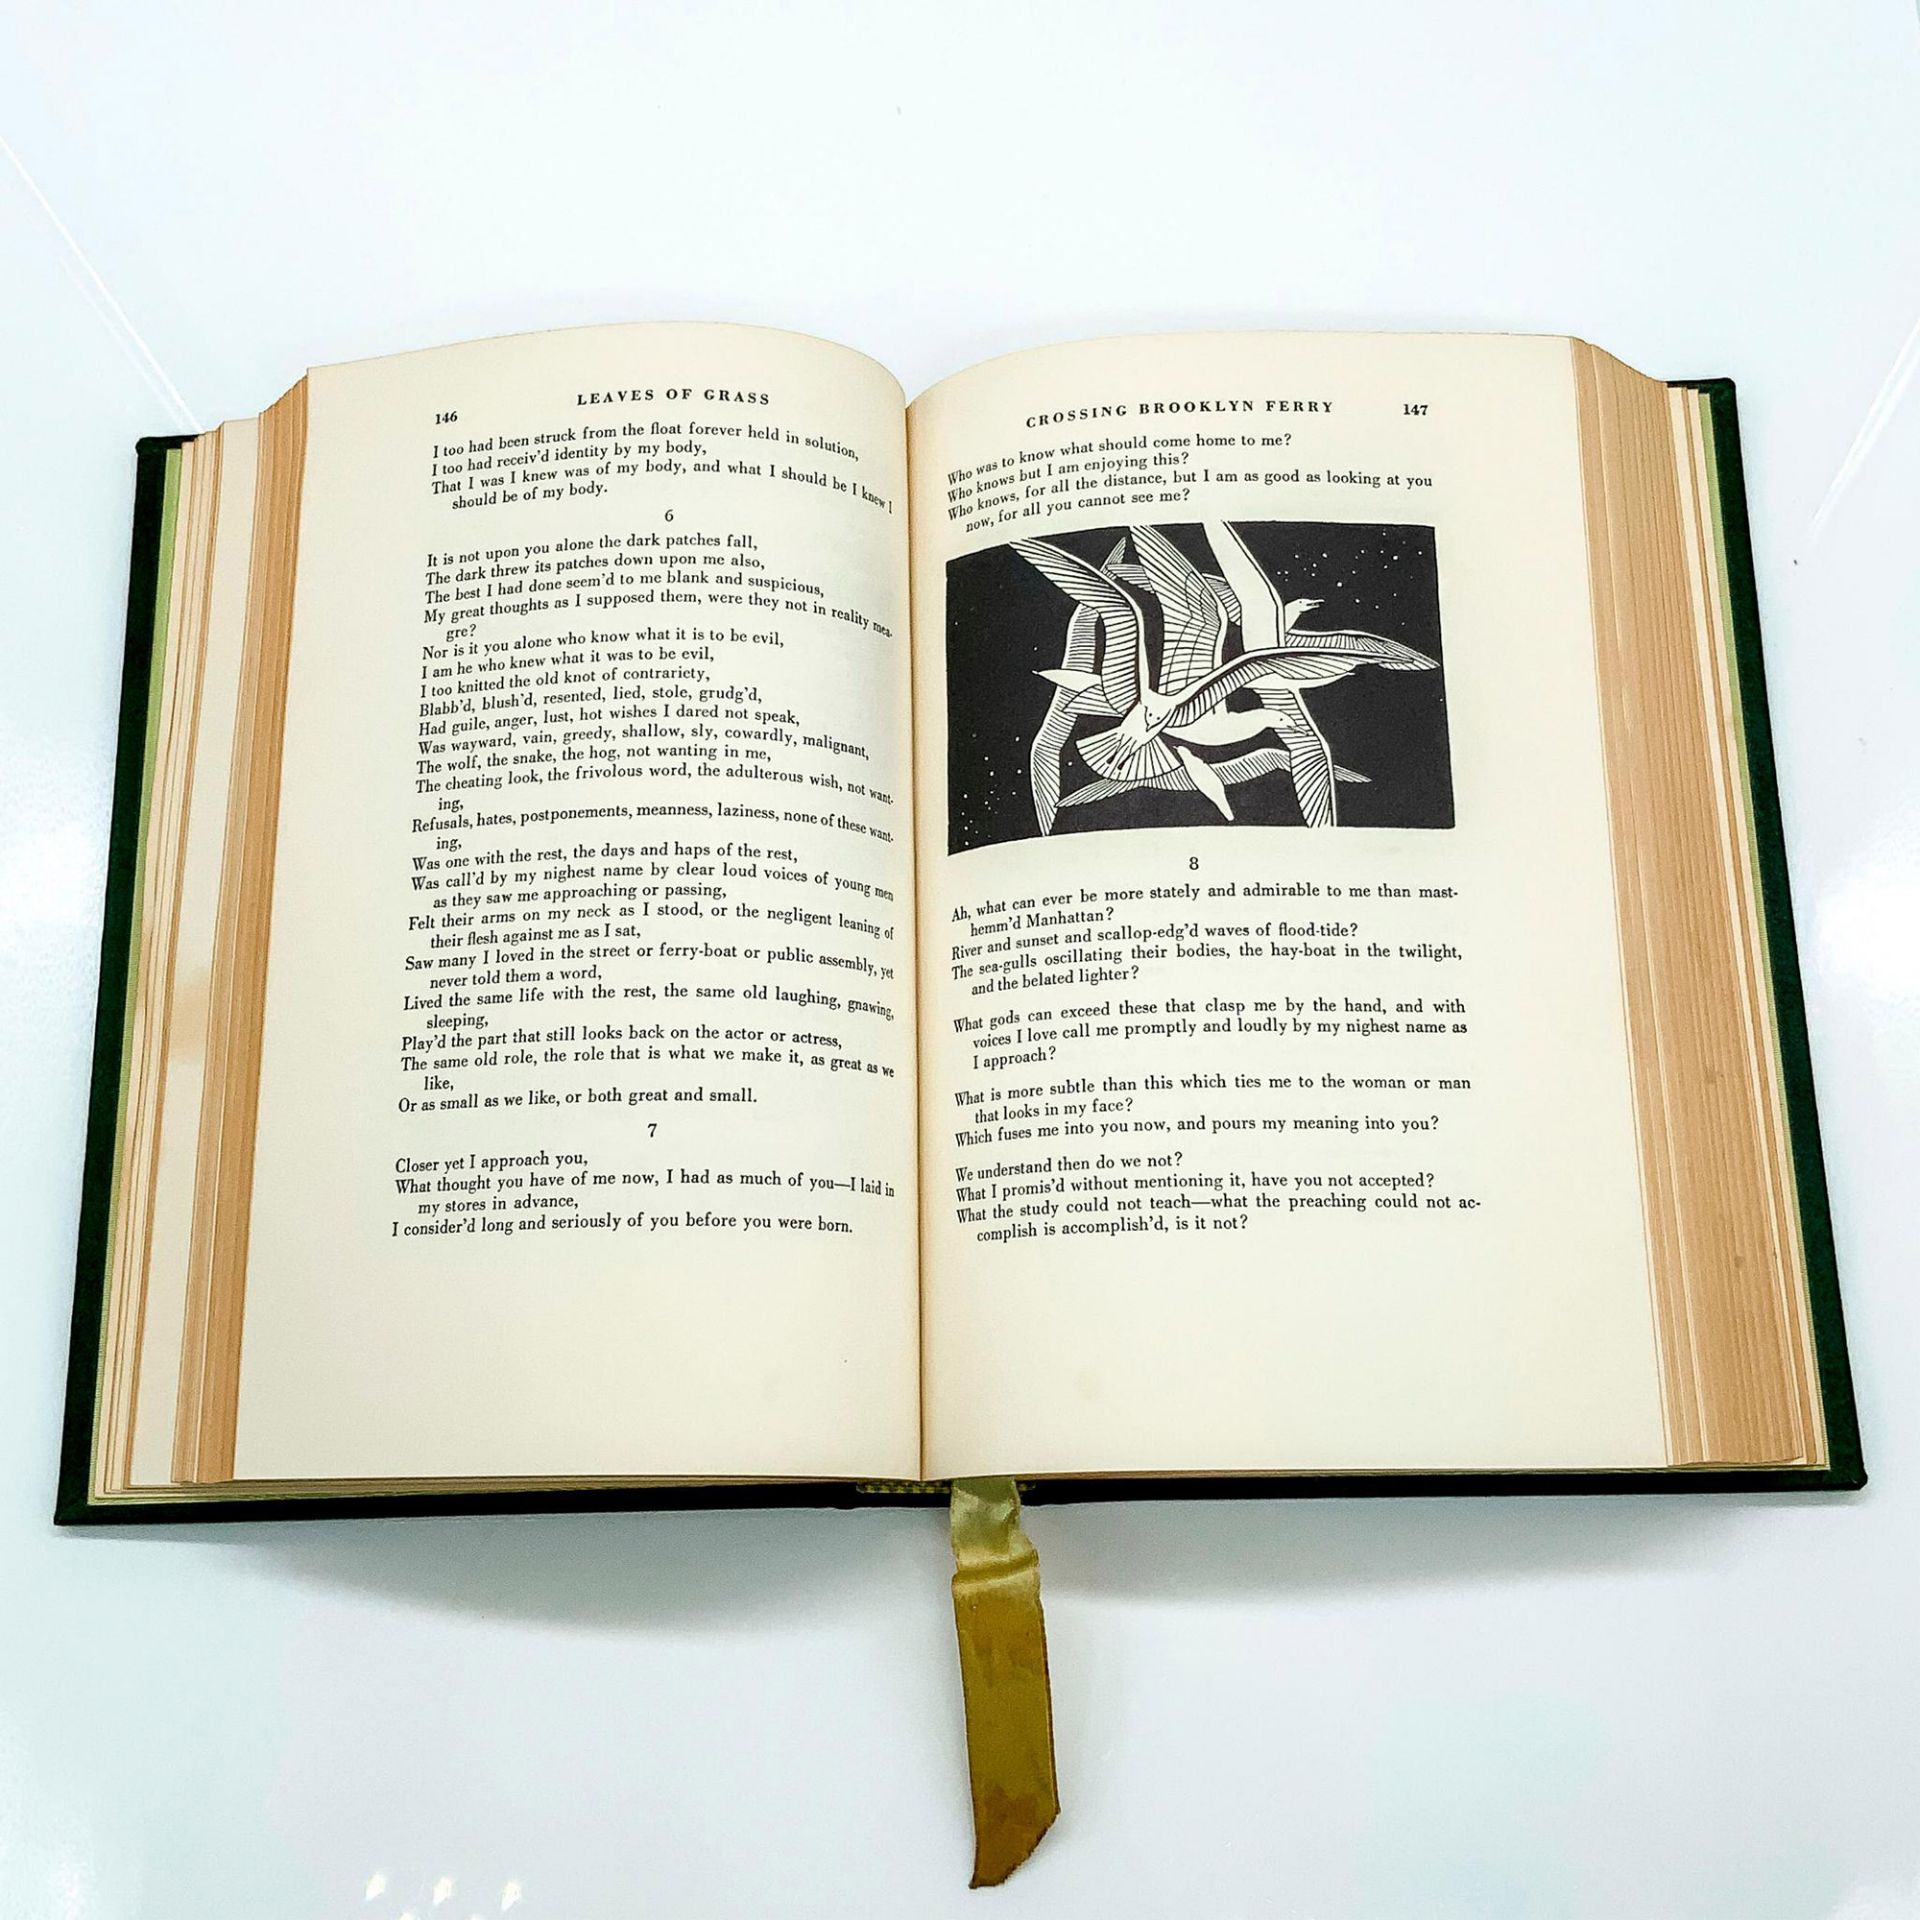 Leaves of Grass by Walt Whitman, Limited Edition Copy - Image 4 of 4